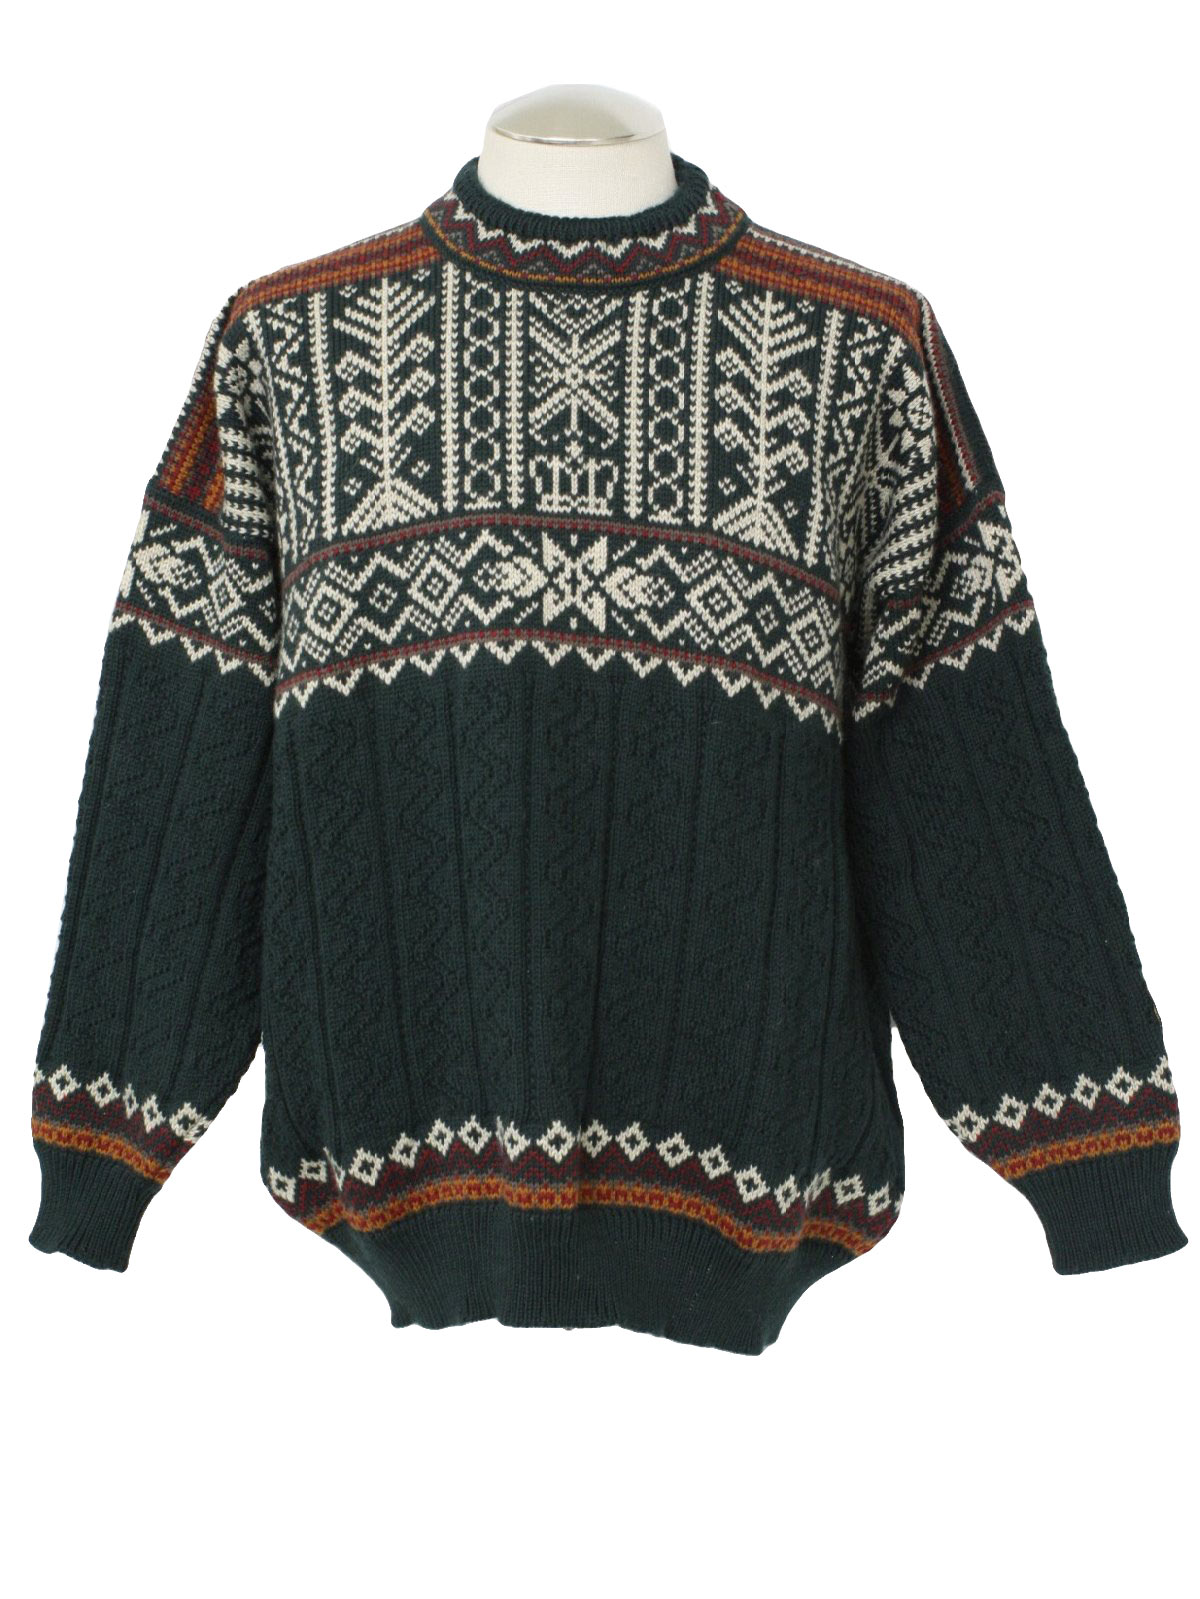 90s Retro Sweater: 90s -Dale of Norway- Mens green, white, red, grey ...